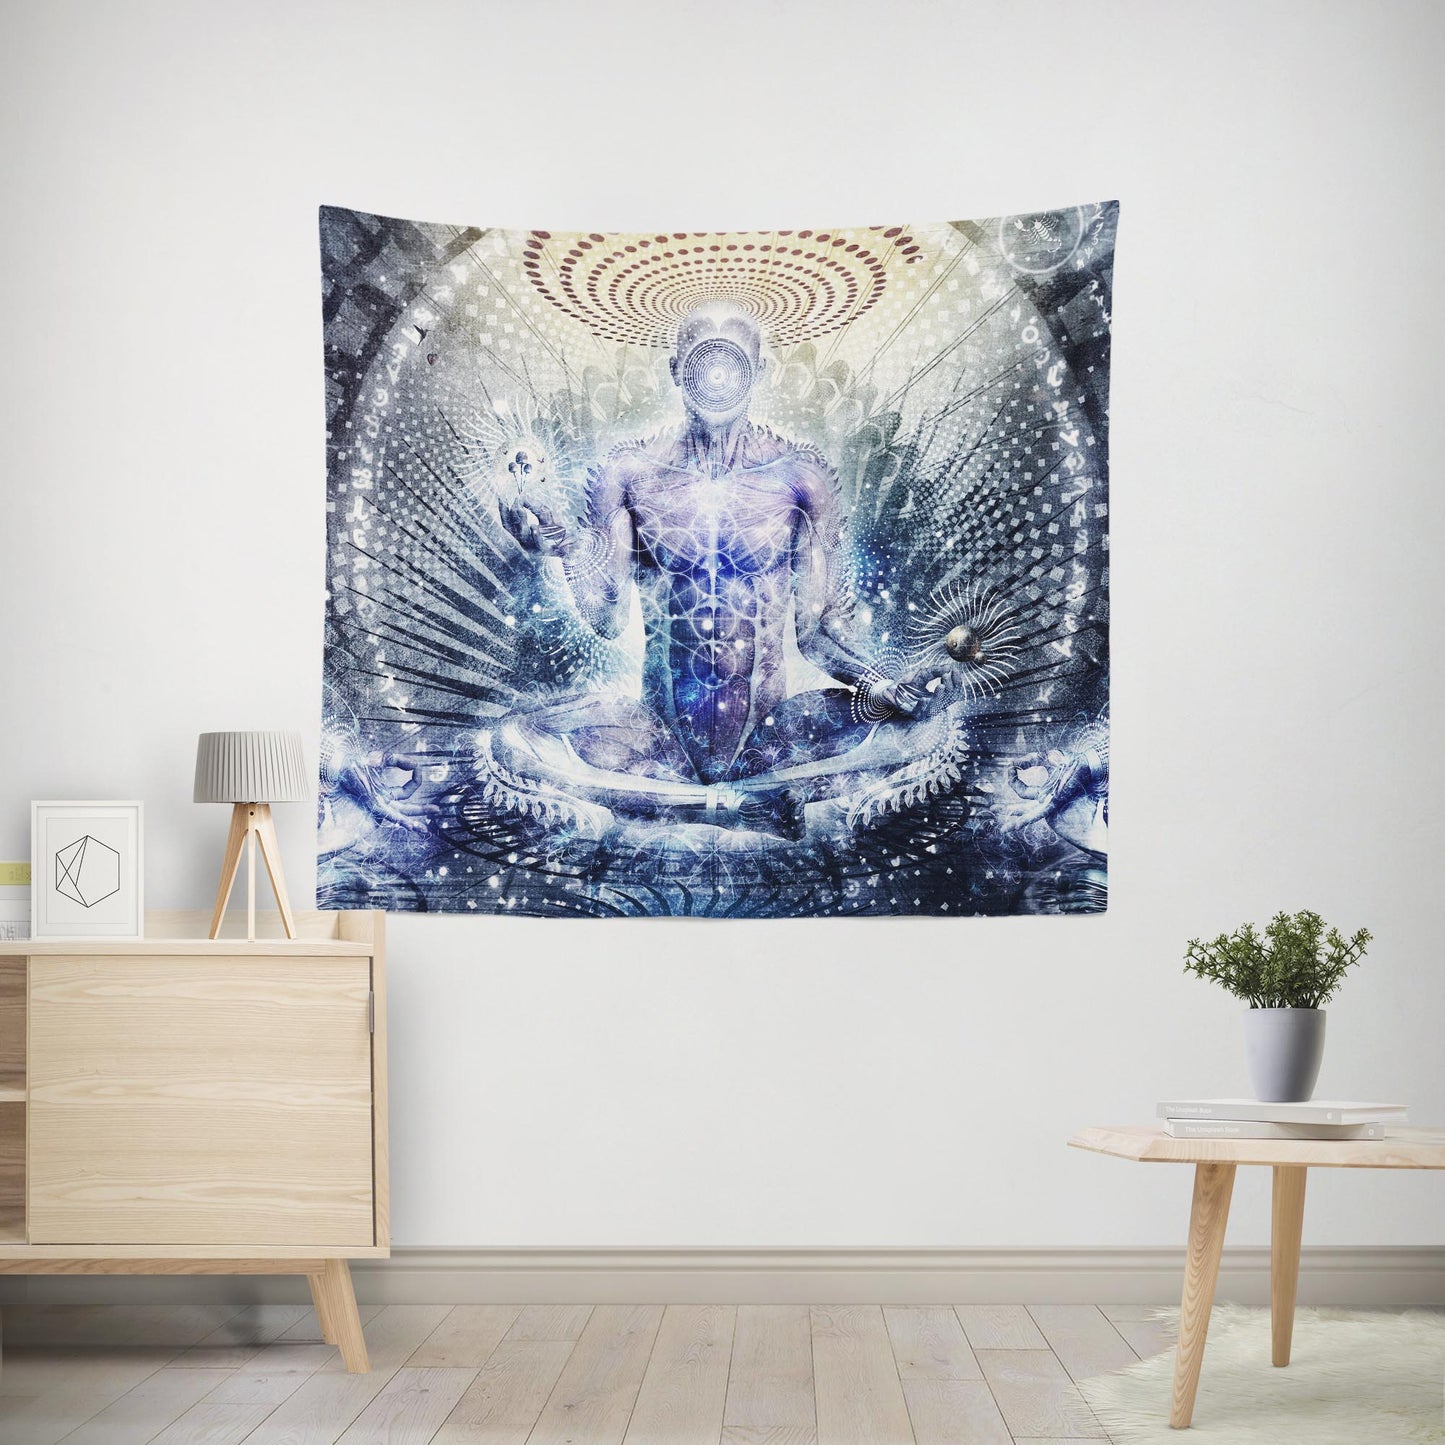 Awake Could Be So Beautiful Tapestry